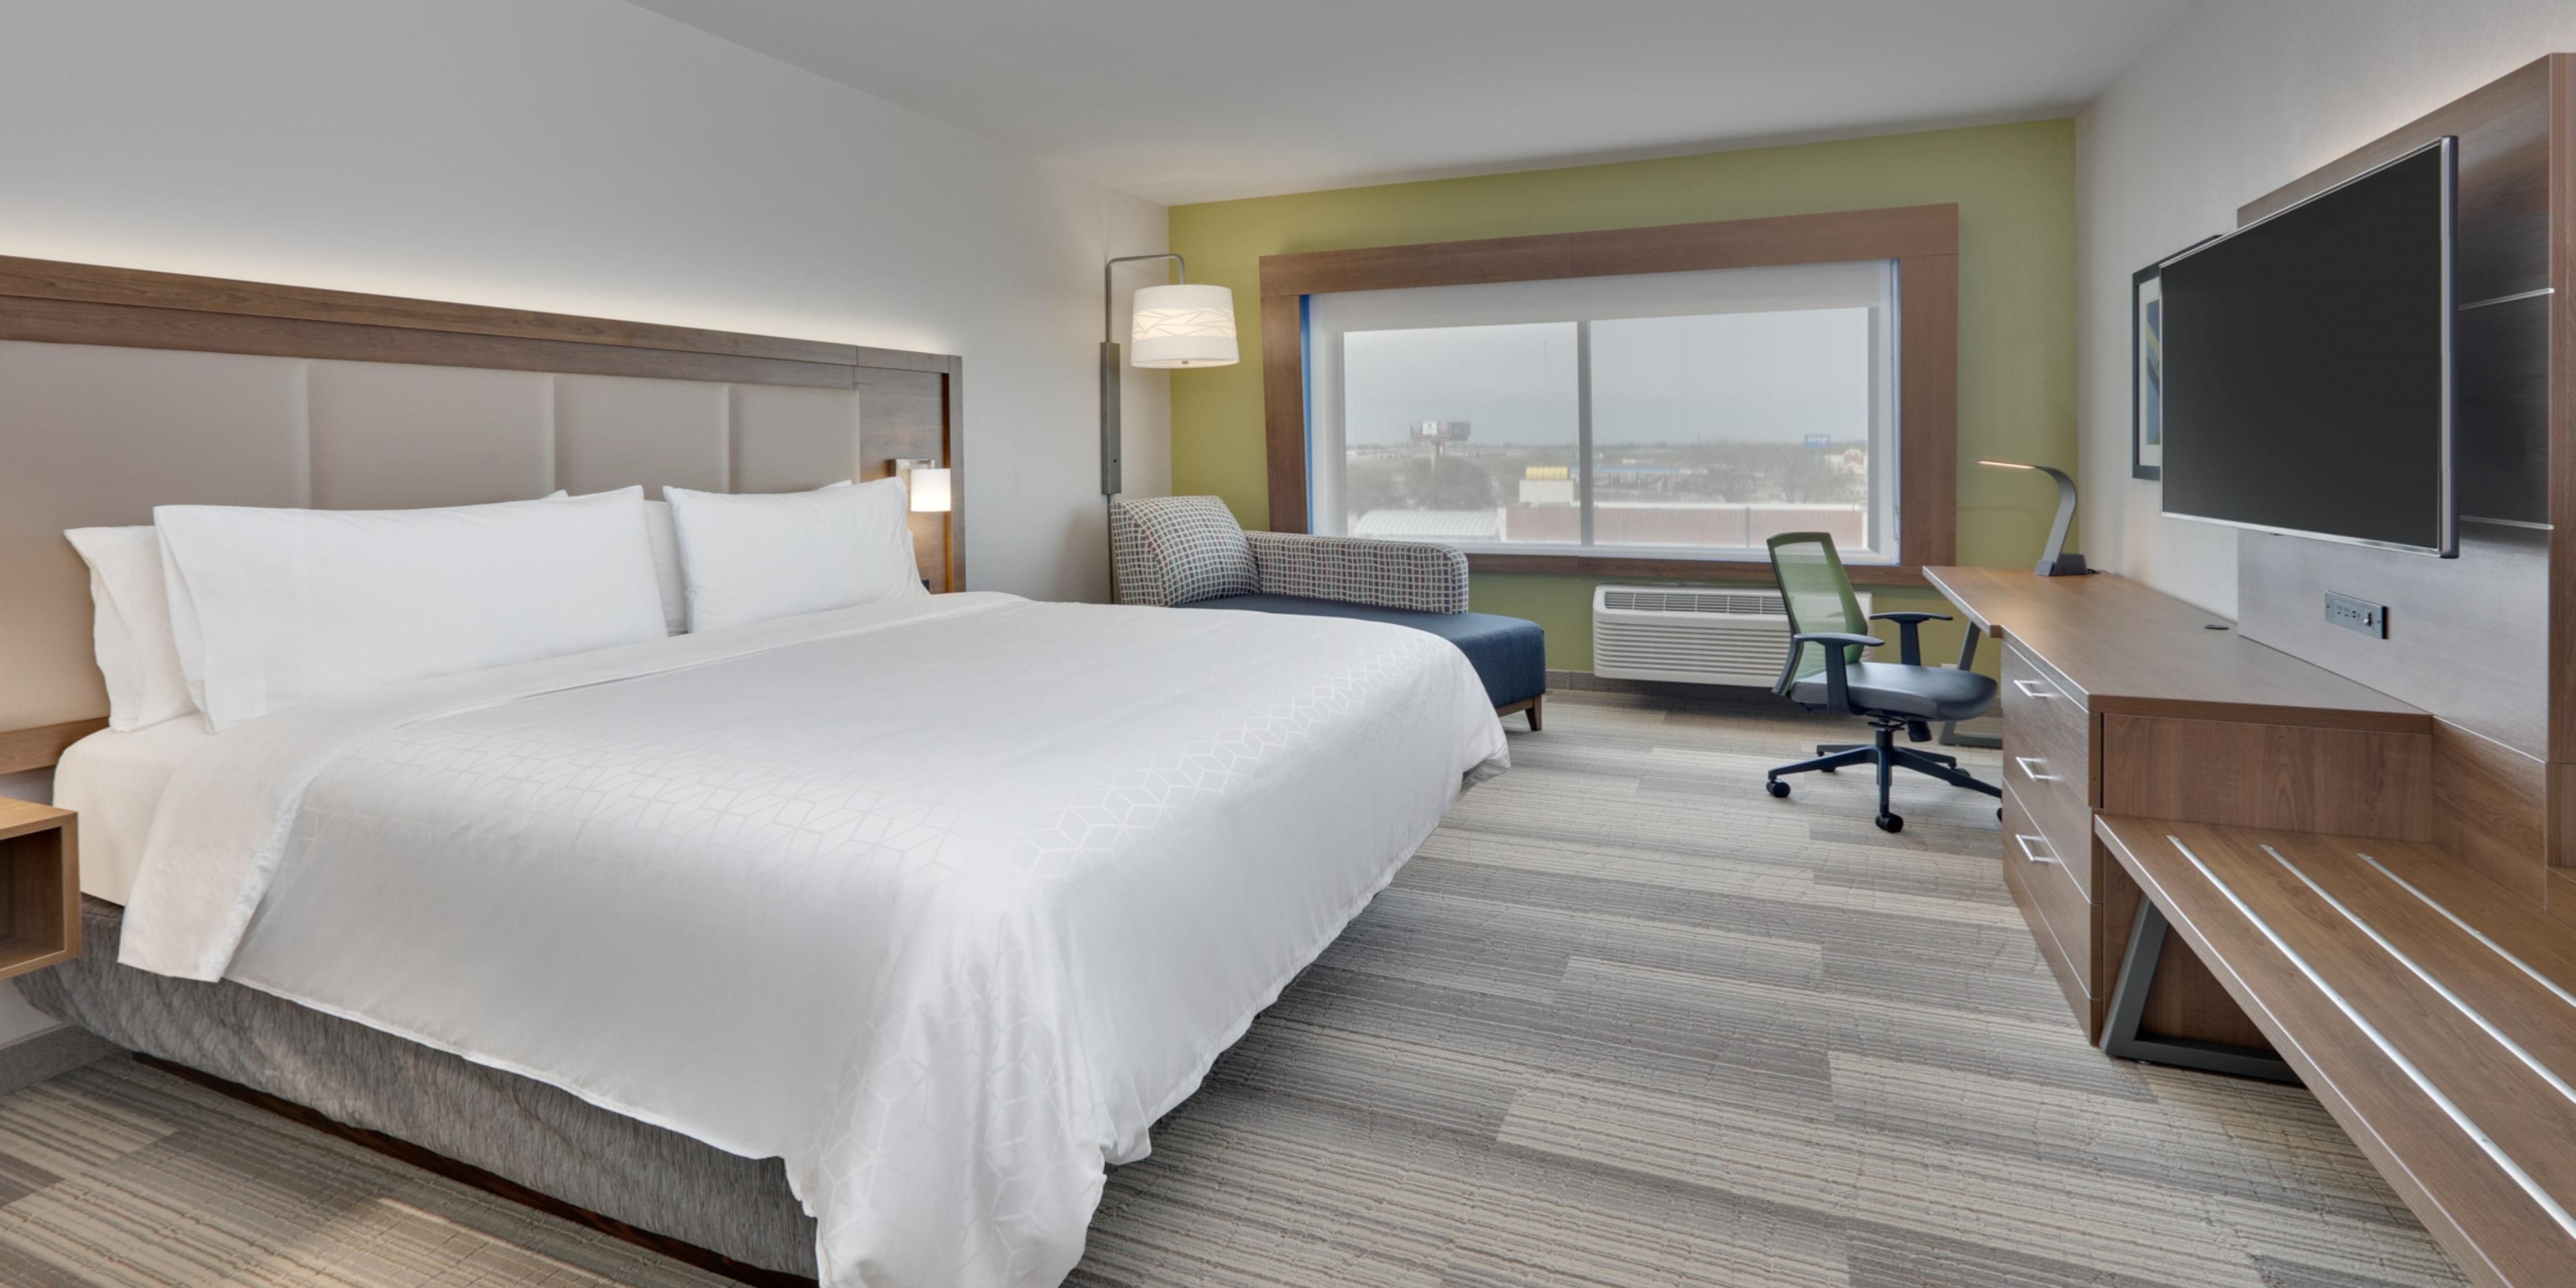 We have renovated our Guest Rooms. "Fresh, clean open hotel room space featuring cozy accommodations, microwave, refrigerator, and Keurig coffee maker (with all the fixings!).
Free high-speed internet in all sleeping rooms as well as the breakfast and sitting area."
